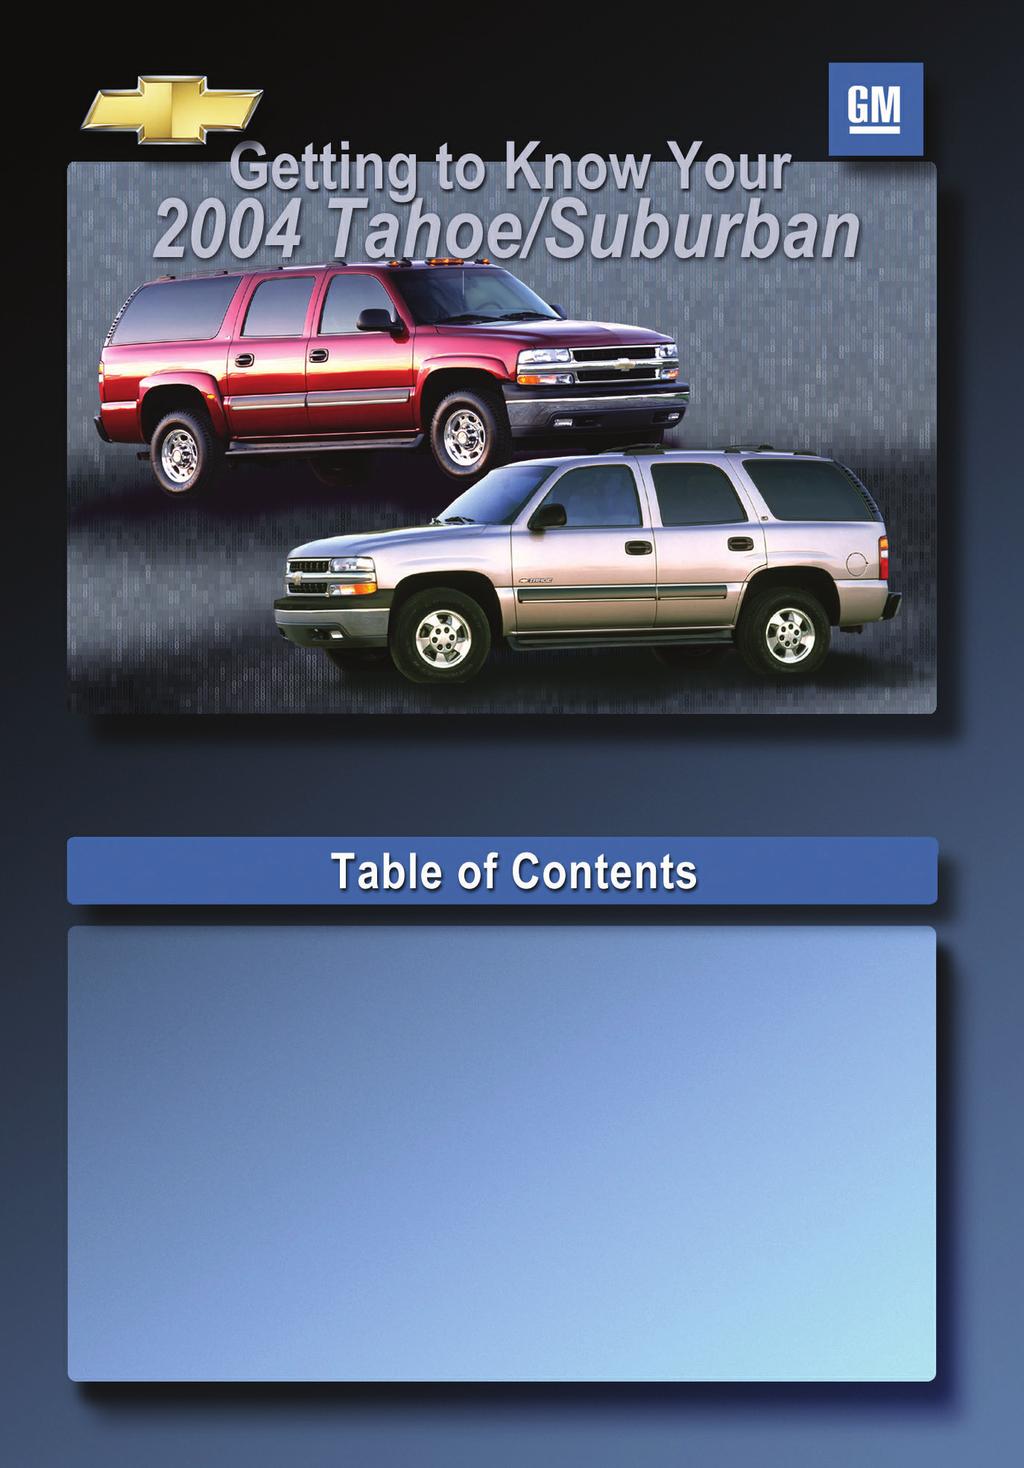 Congratulations on your purchase of a Chevrolet Tahoe or Suburban. Please read this information and your Owner Manual to ensure an outstanding ownership experience.